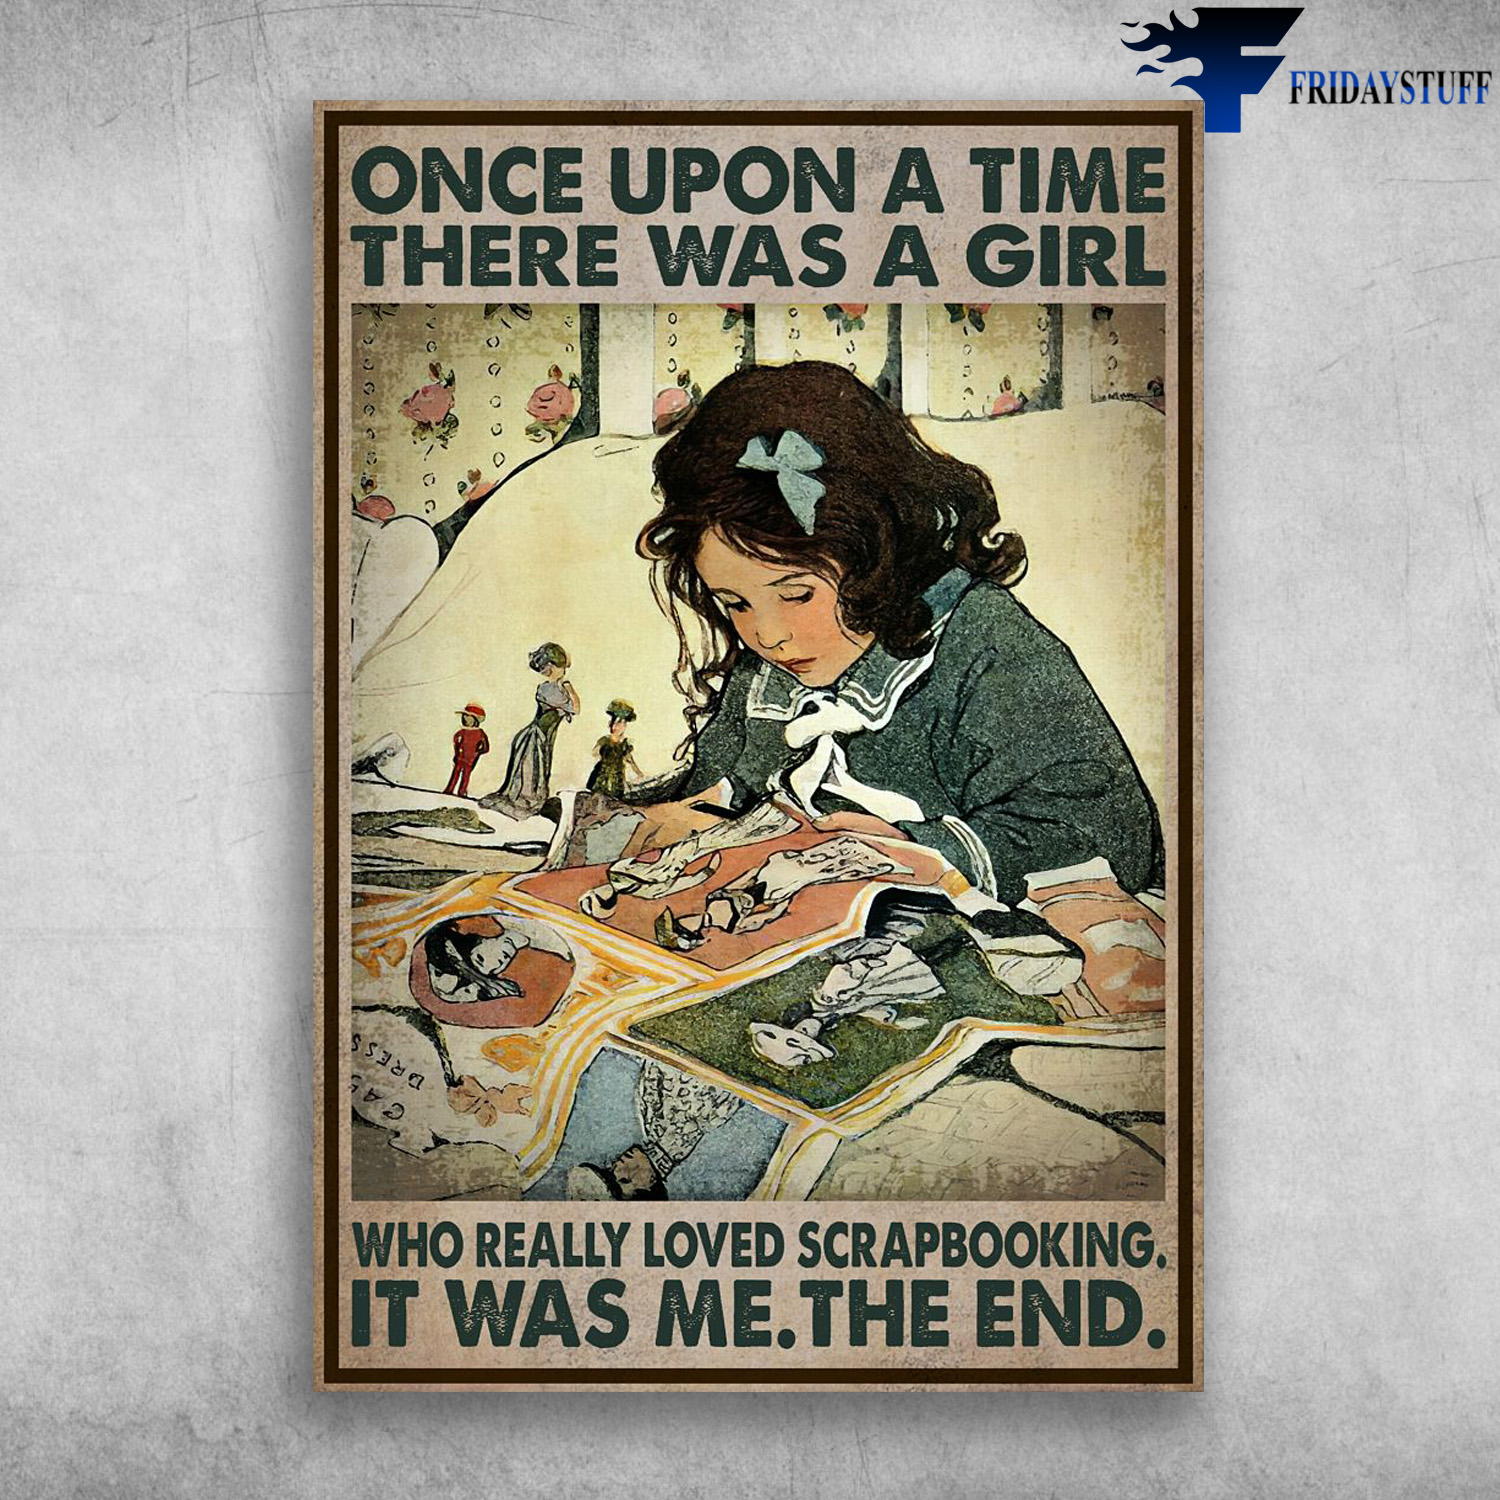 Girl Loves Scrapbooking - Once Upon A Time, There Was A Girl, Who Really Loved Scrapbooking, It Was Me, The End